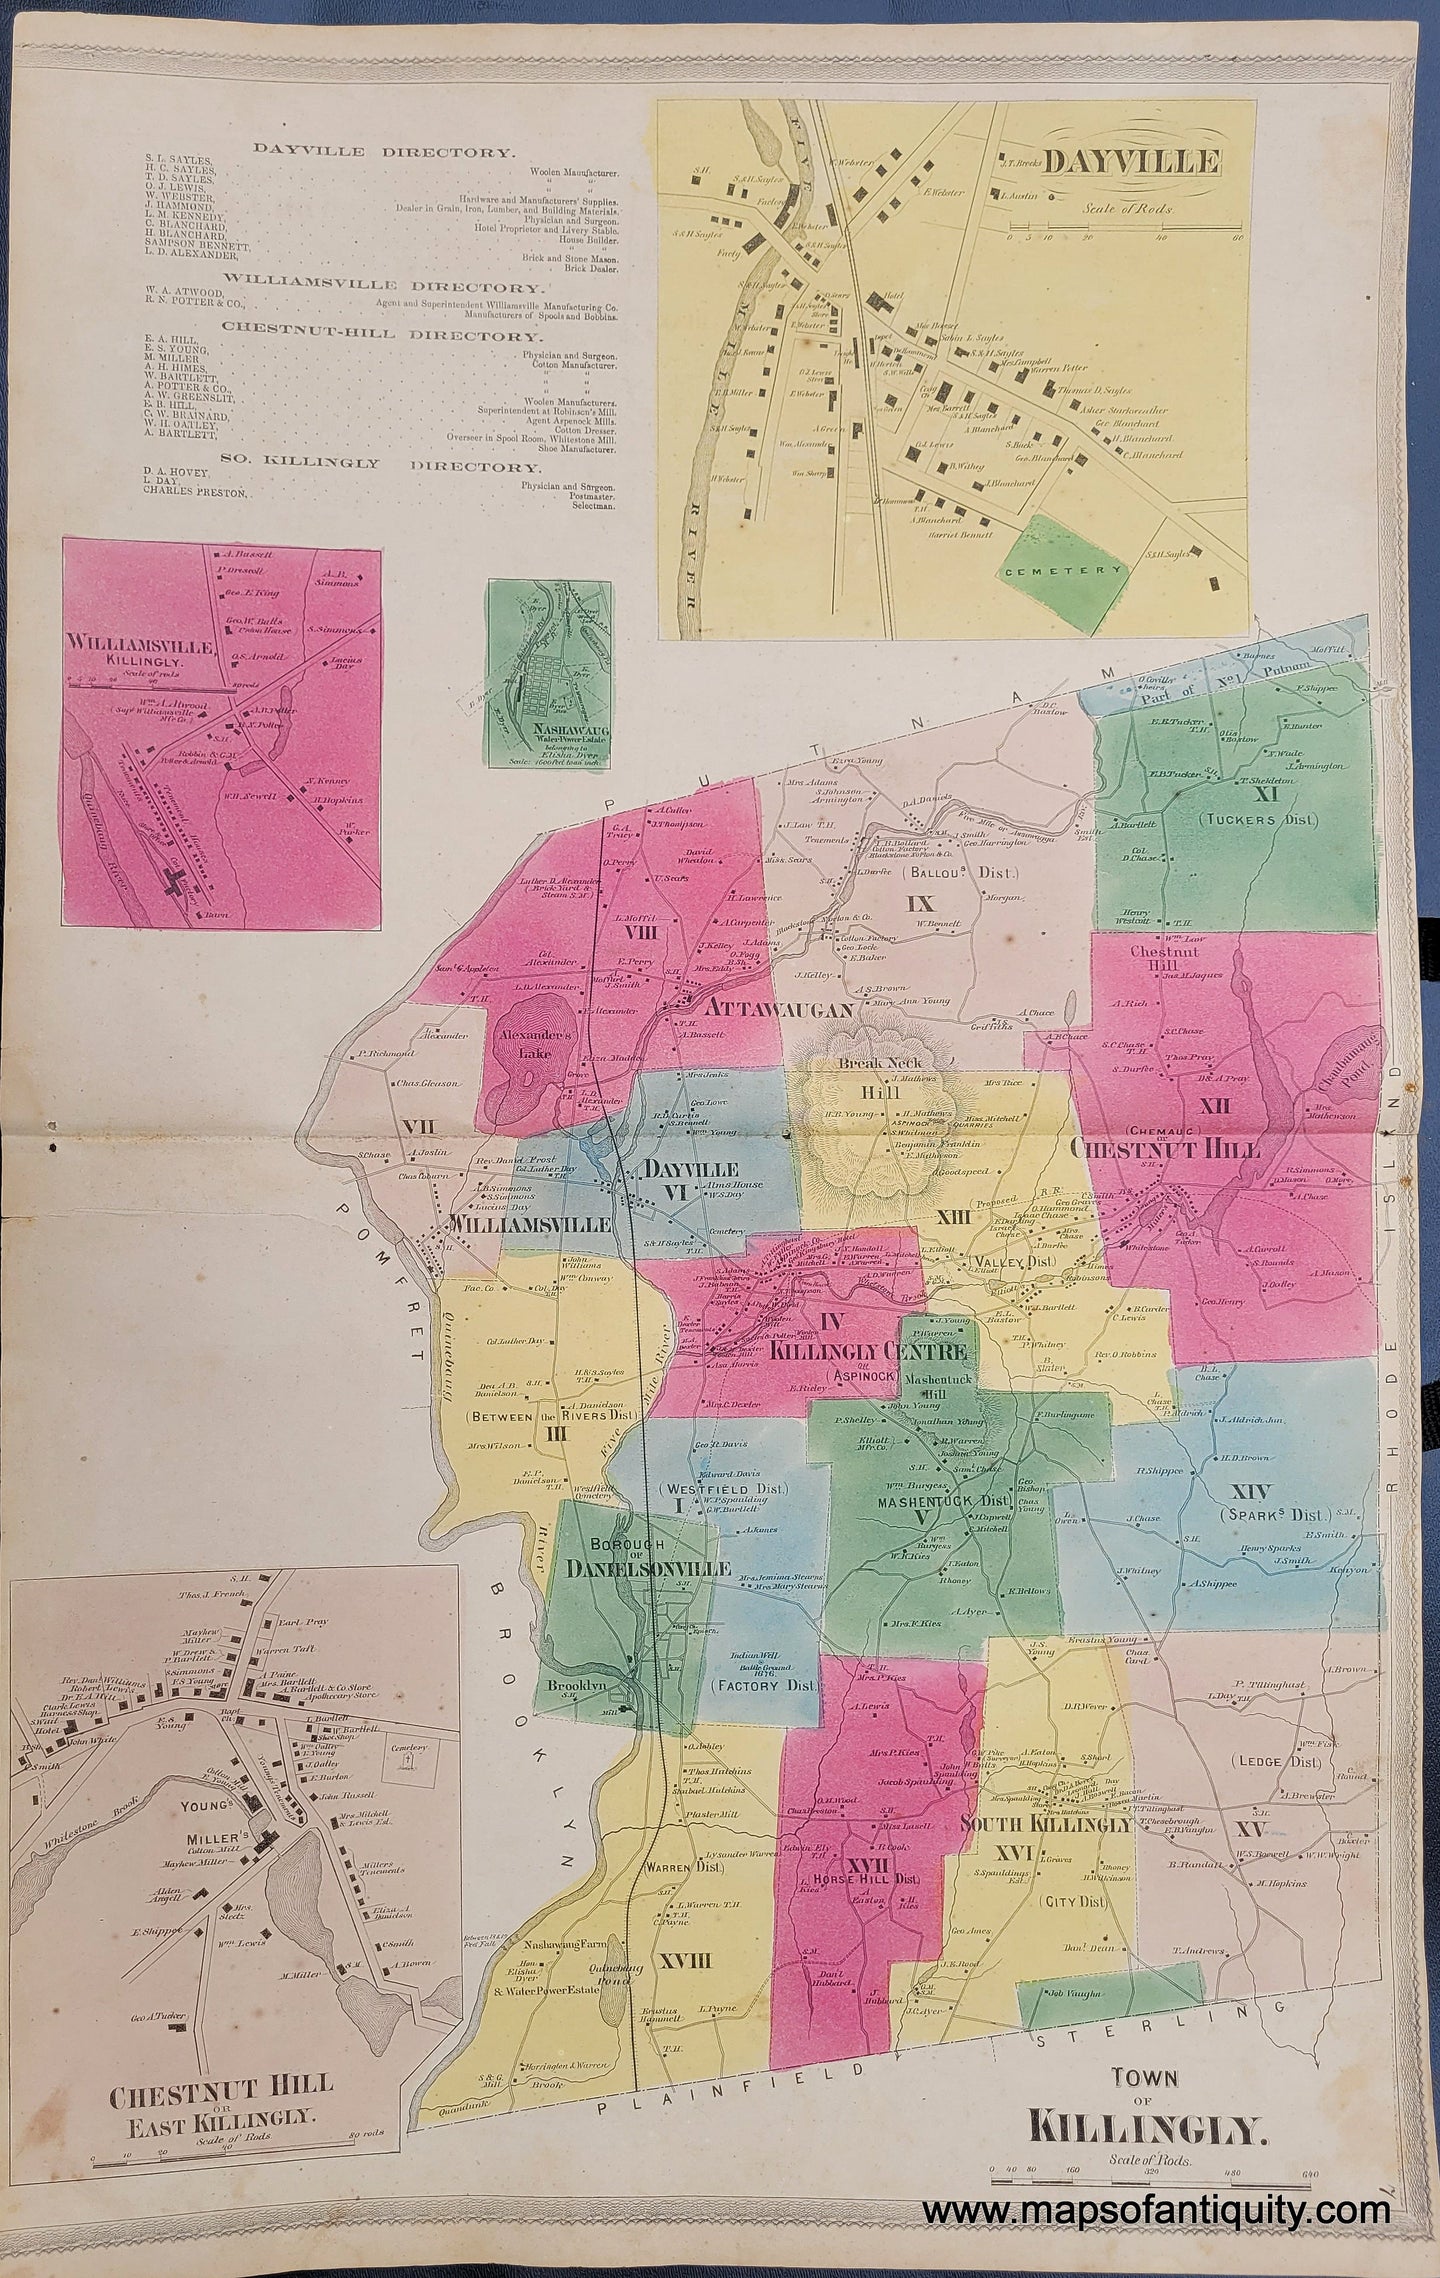 Antique-Hand-Colored-Map-Killingly-Dayville-Nashawaug-Williamsville-Chestnut-Hill--1869-Gray-Keeney-Maps-Of-Antiquity